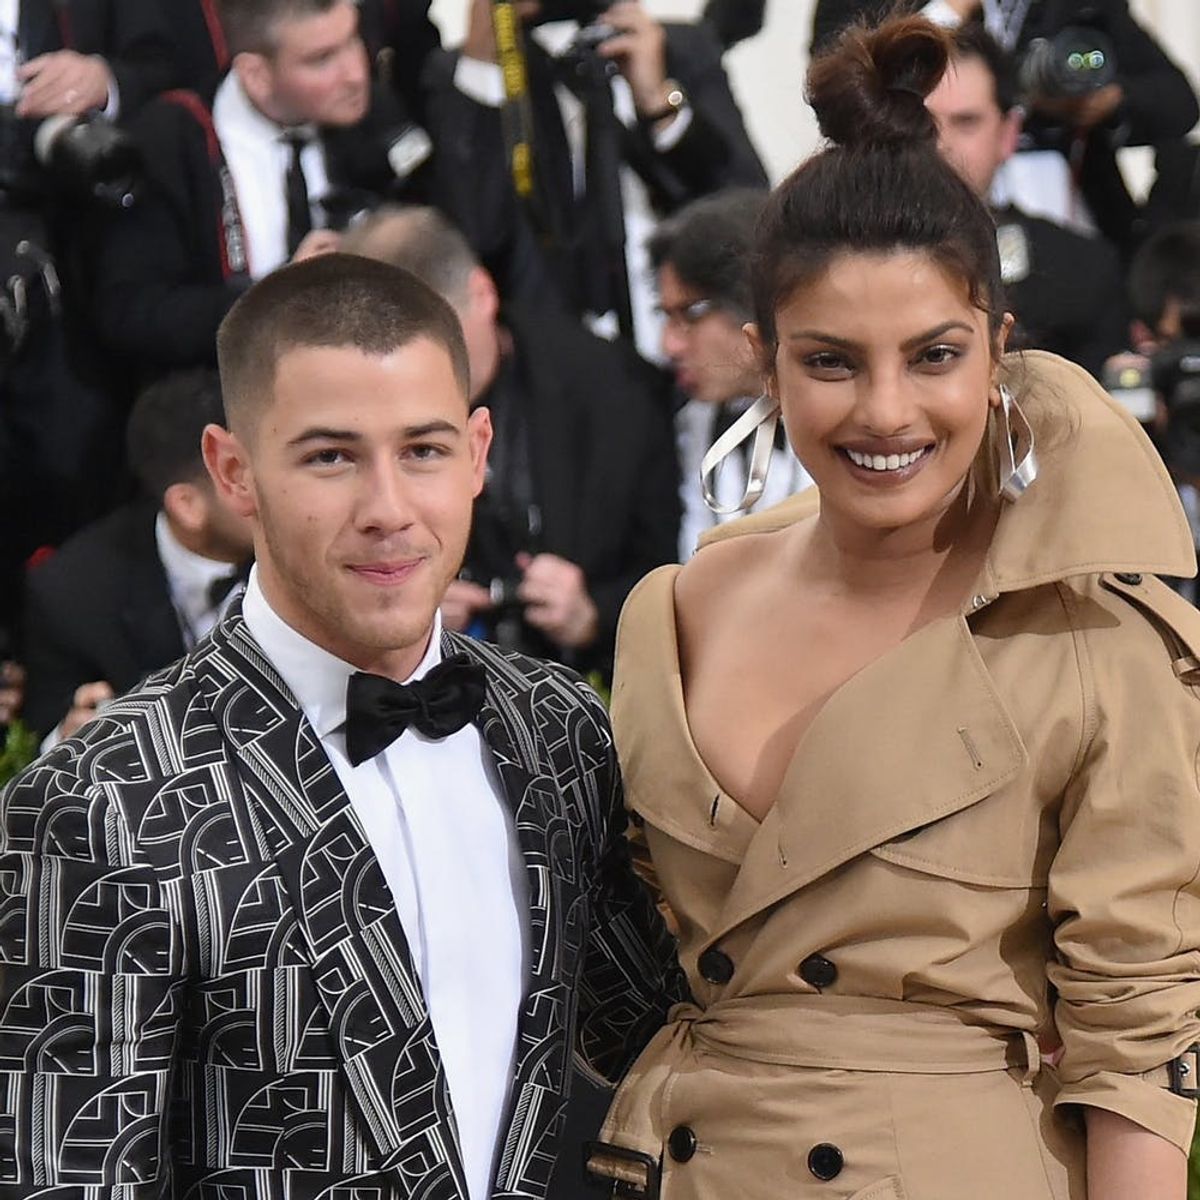 Nick Jonas and Priyanka Chopra Confirmed Their Engagement With the Cutest Photo